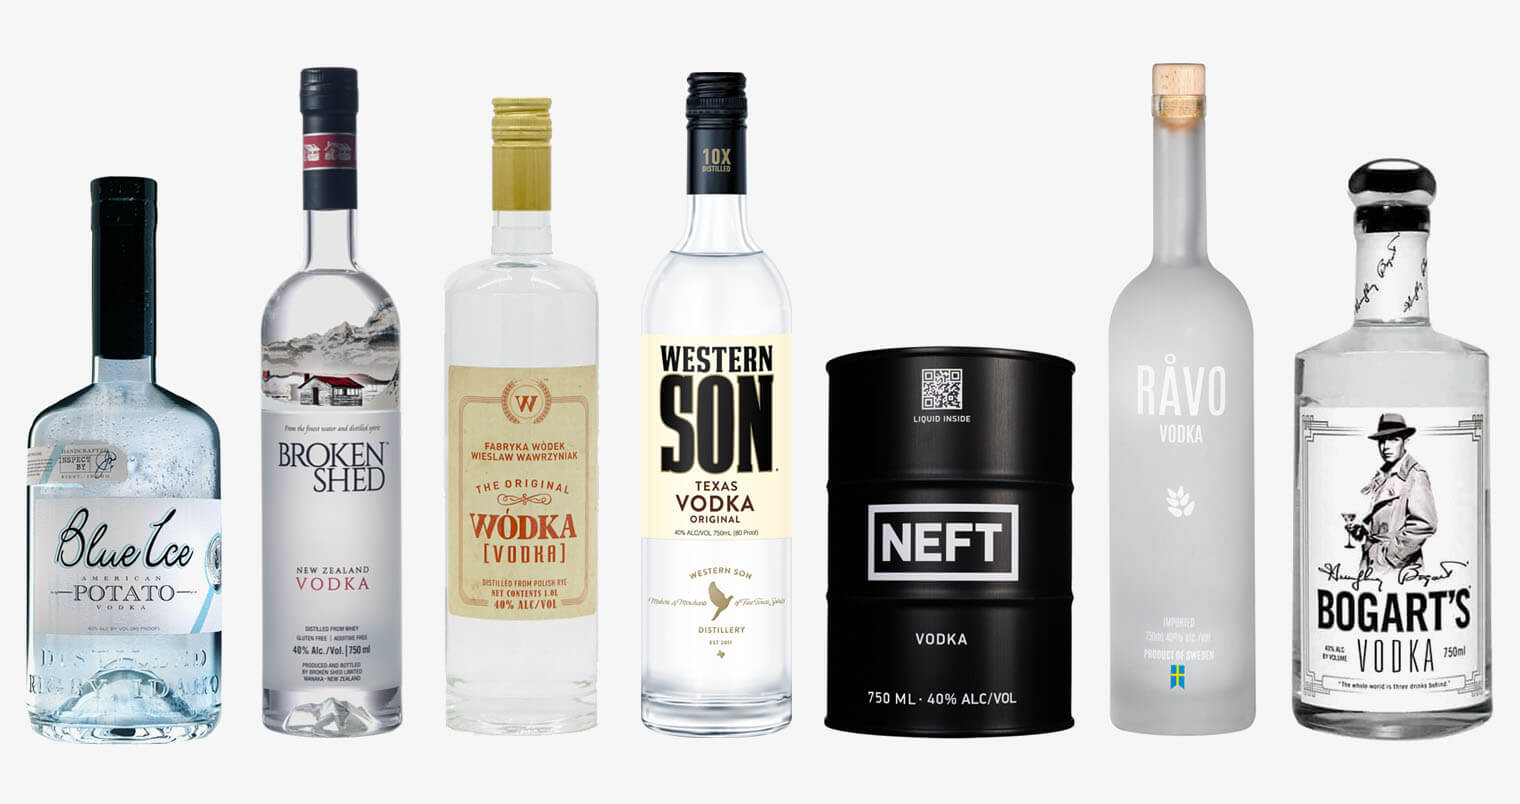 Top 7 Vodka Brands for Delivery, featured image, bottles on white